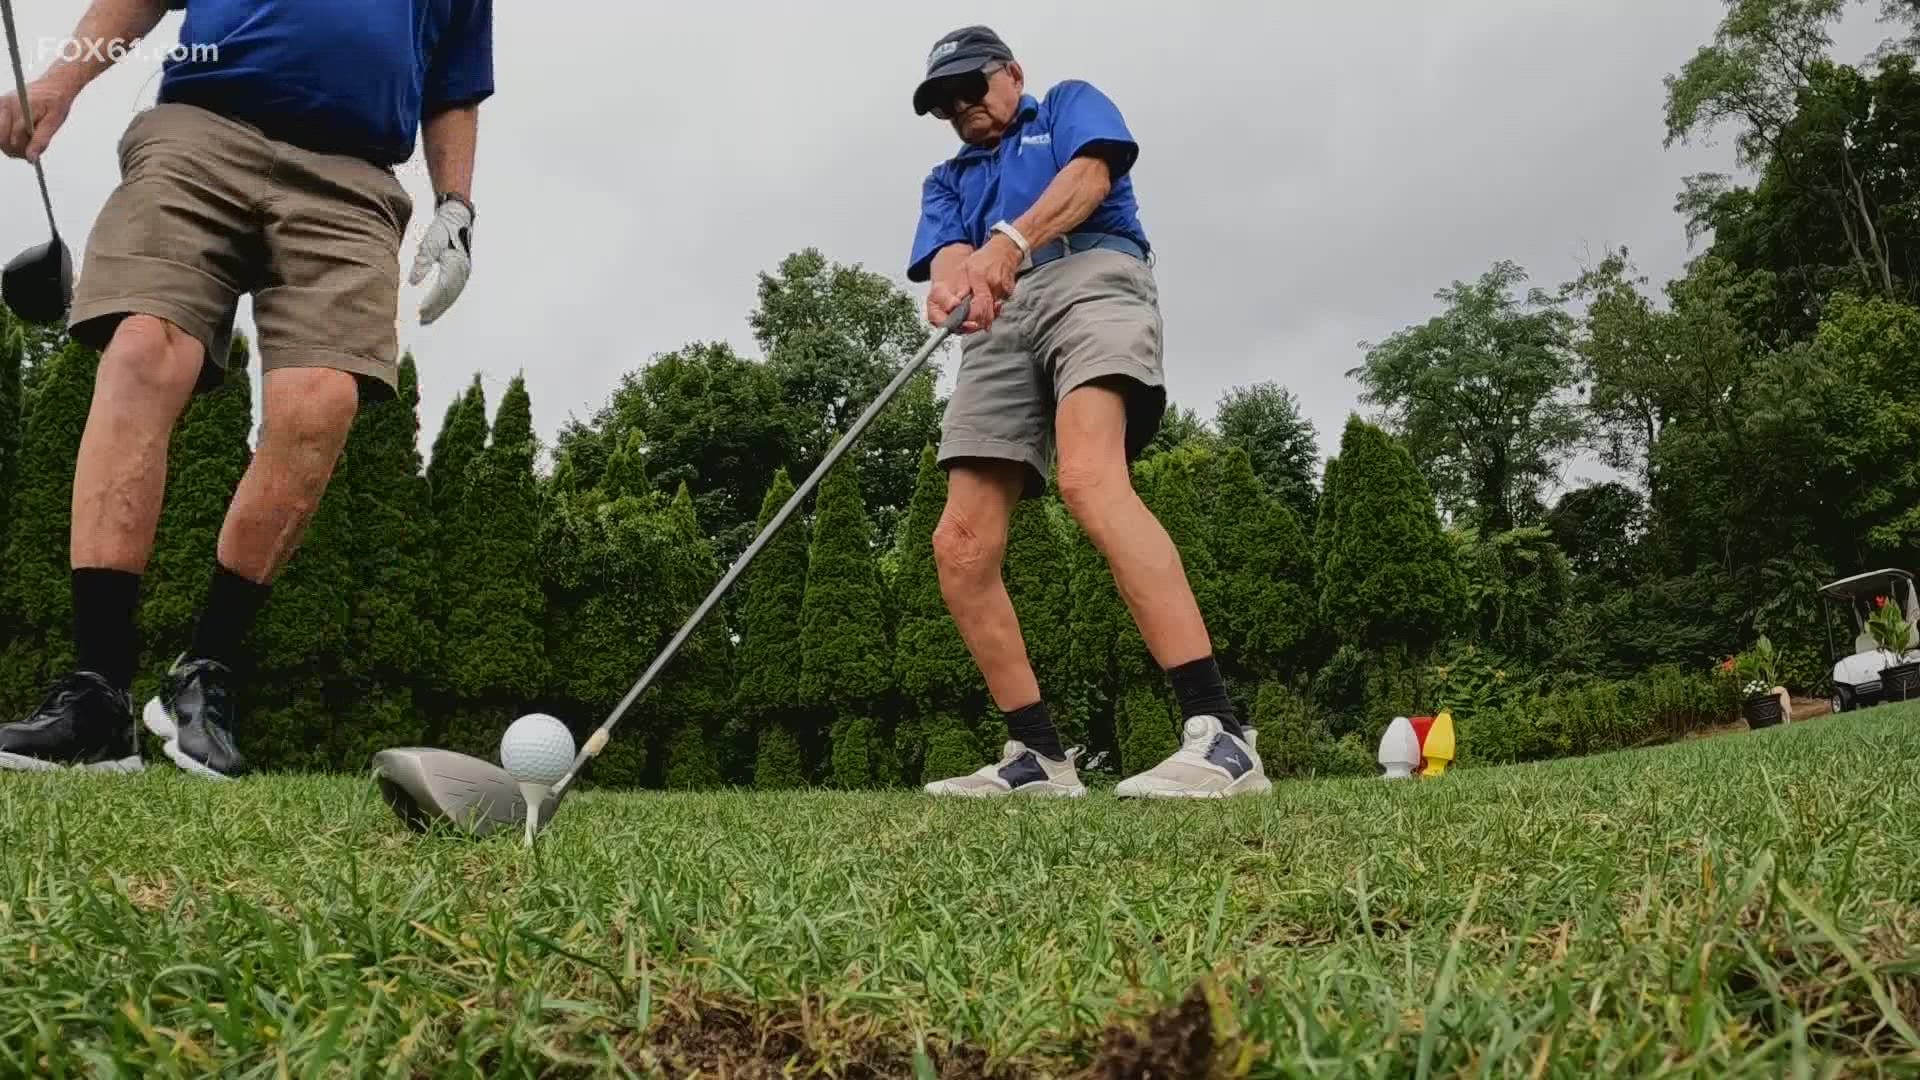 John Casolo has been totally blind since 1984, but the 90-year-old is intent on still hitting the links.